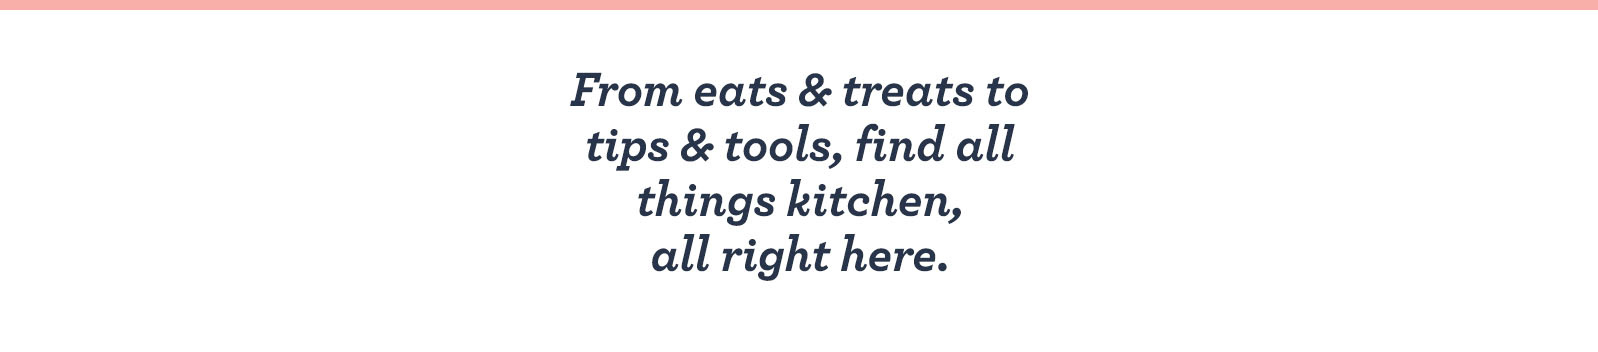 From eats & treats to tips & tools, find all things kitchen, all right here.